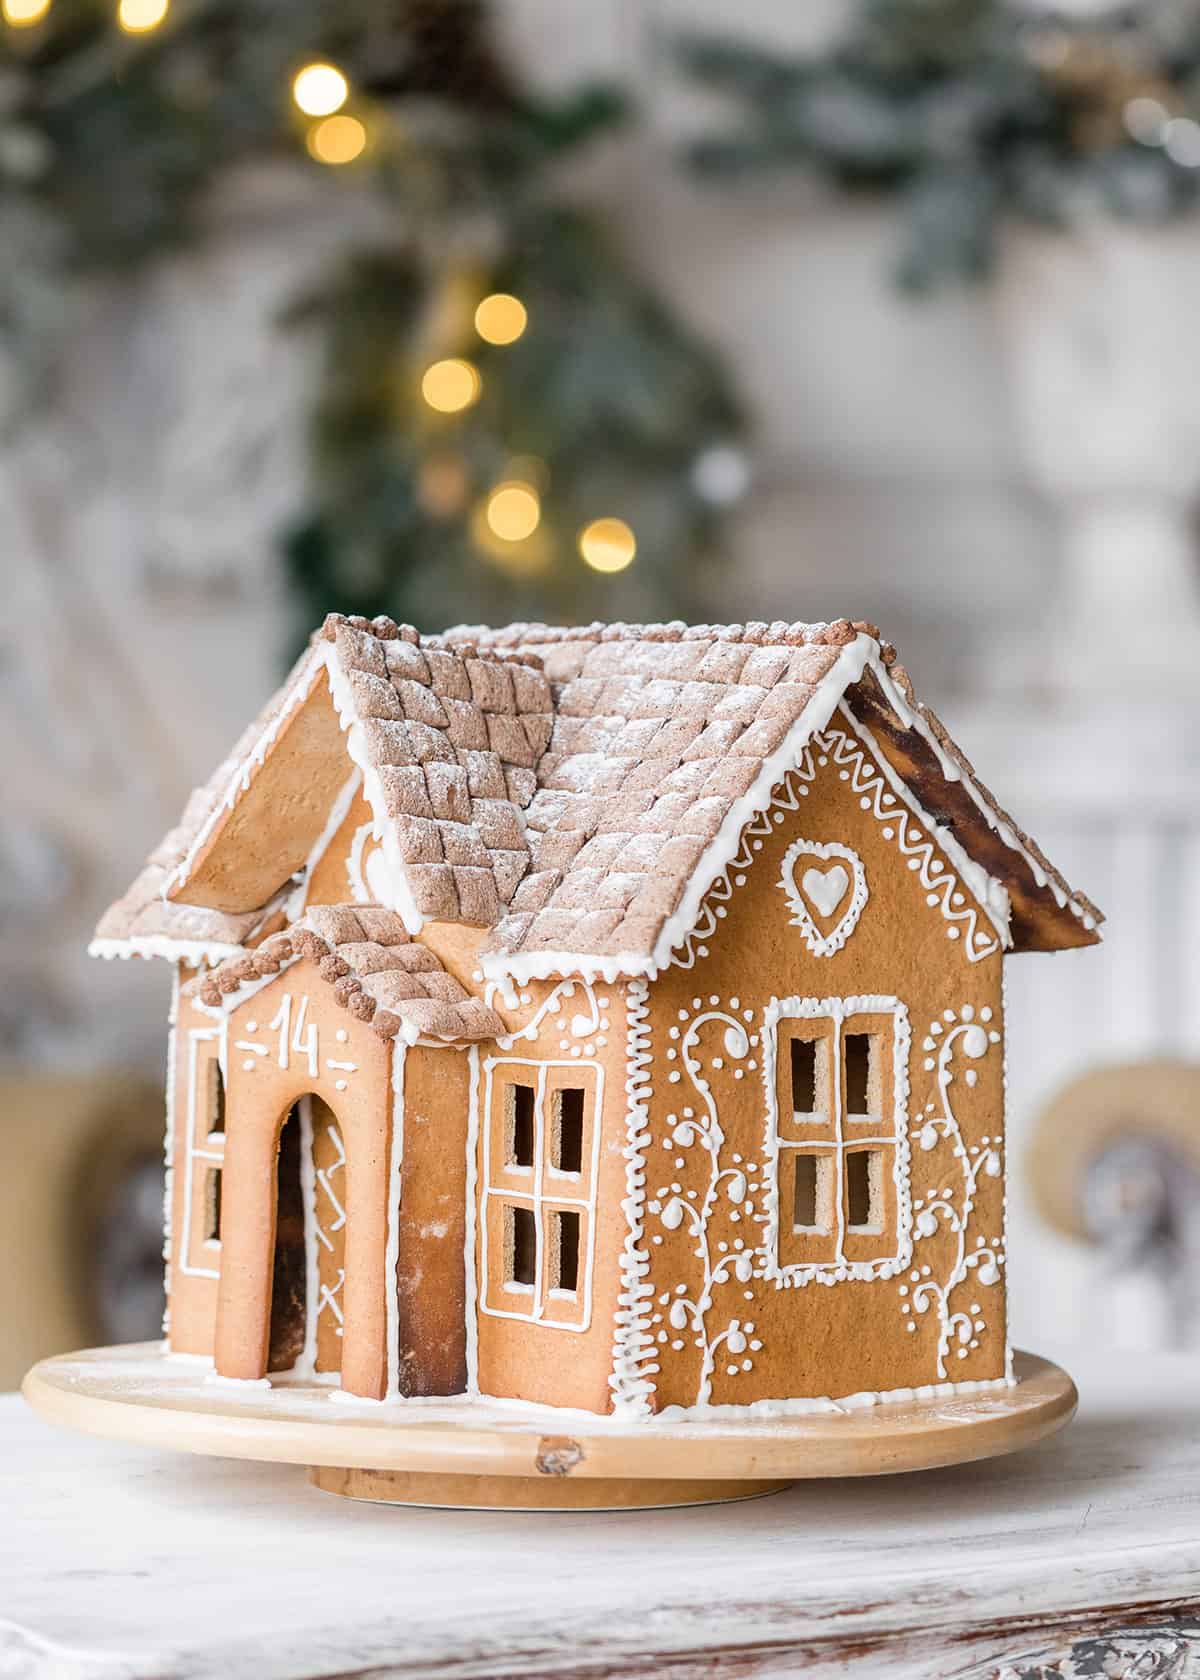 Homemade gingerbread house with white icing decorations on a table.